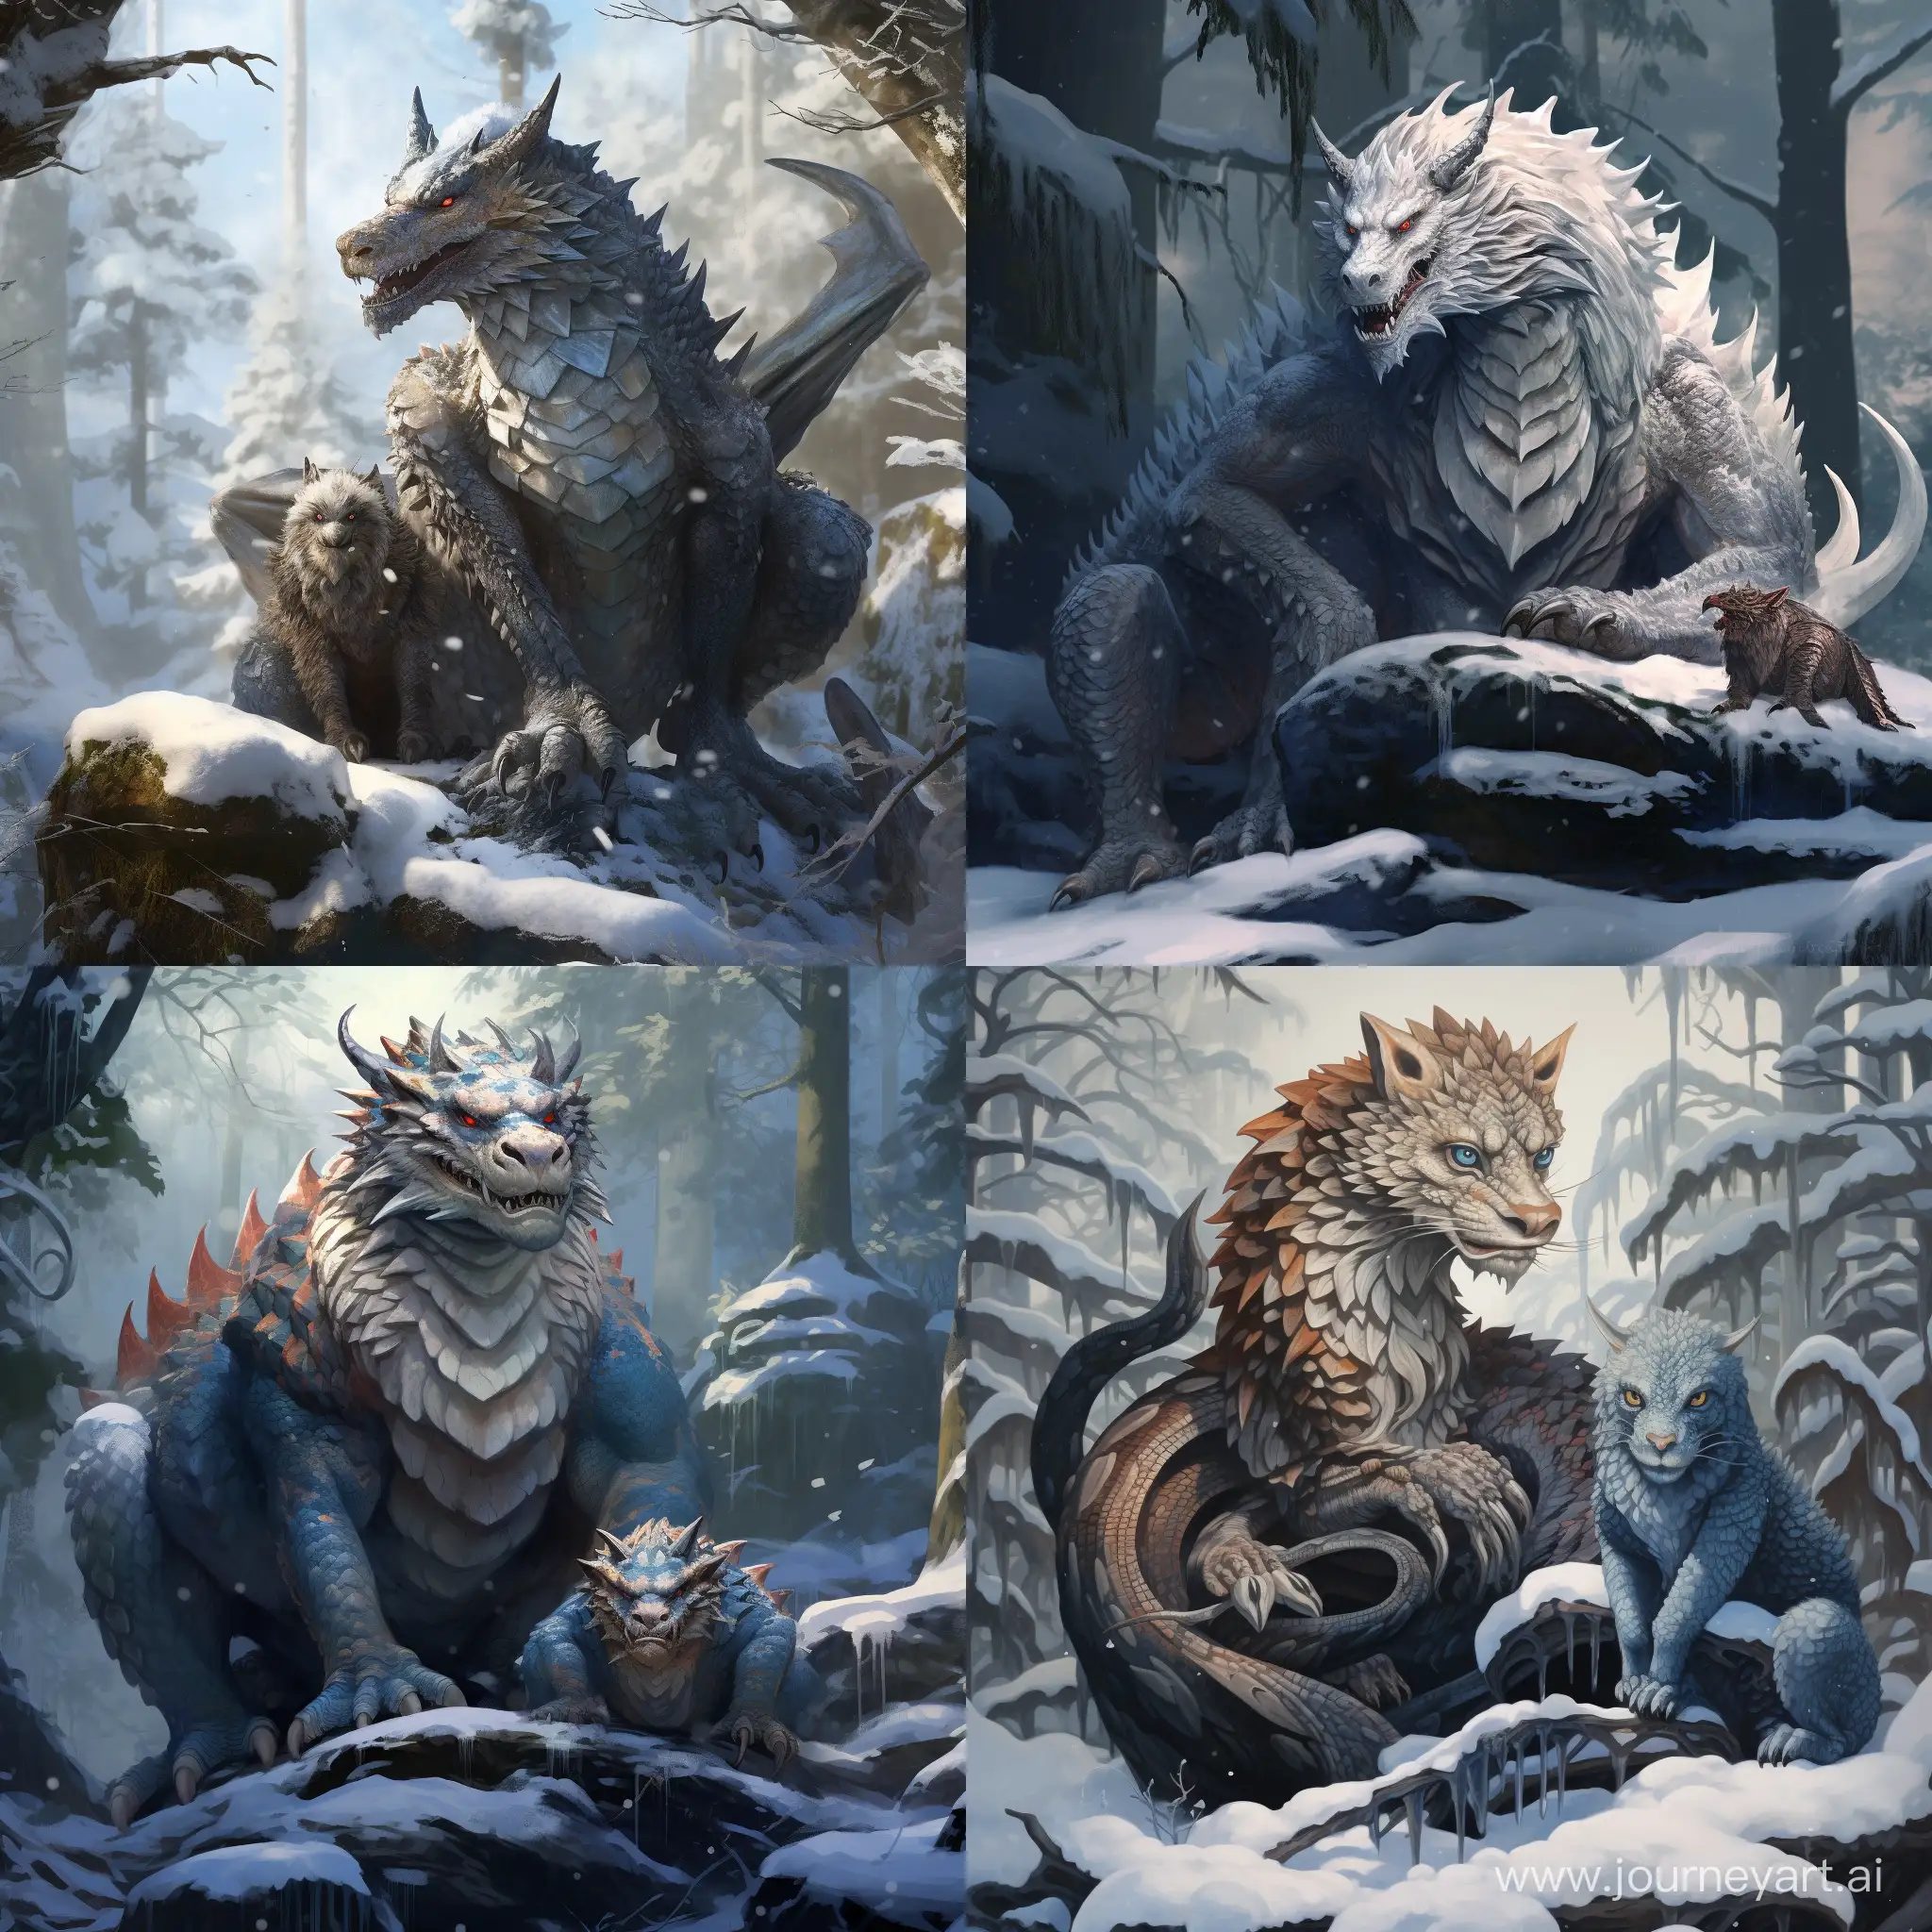 A hybrid of a dragon and a raccoon sits on a large rock in a snowy forest